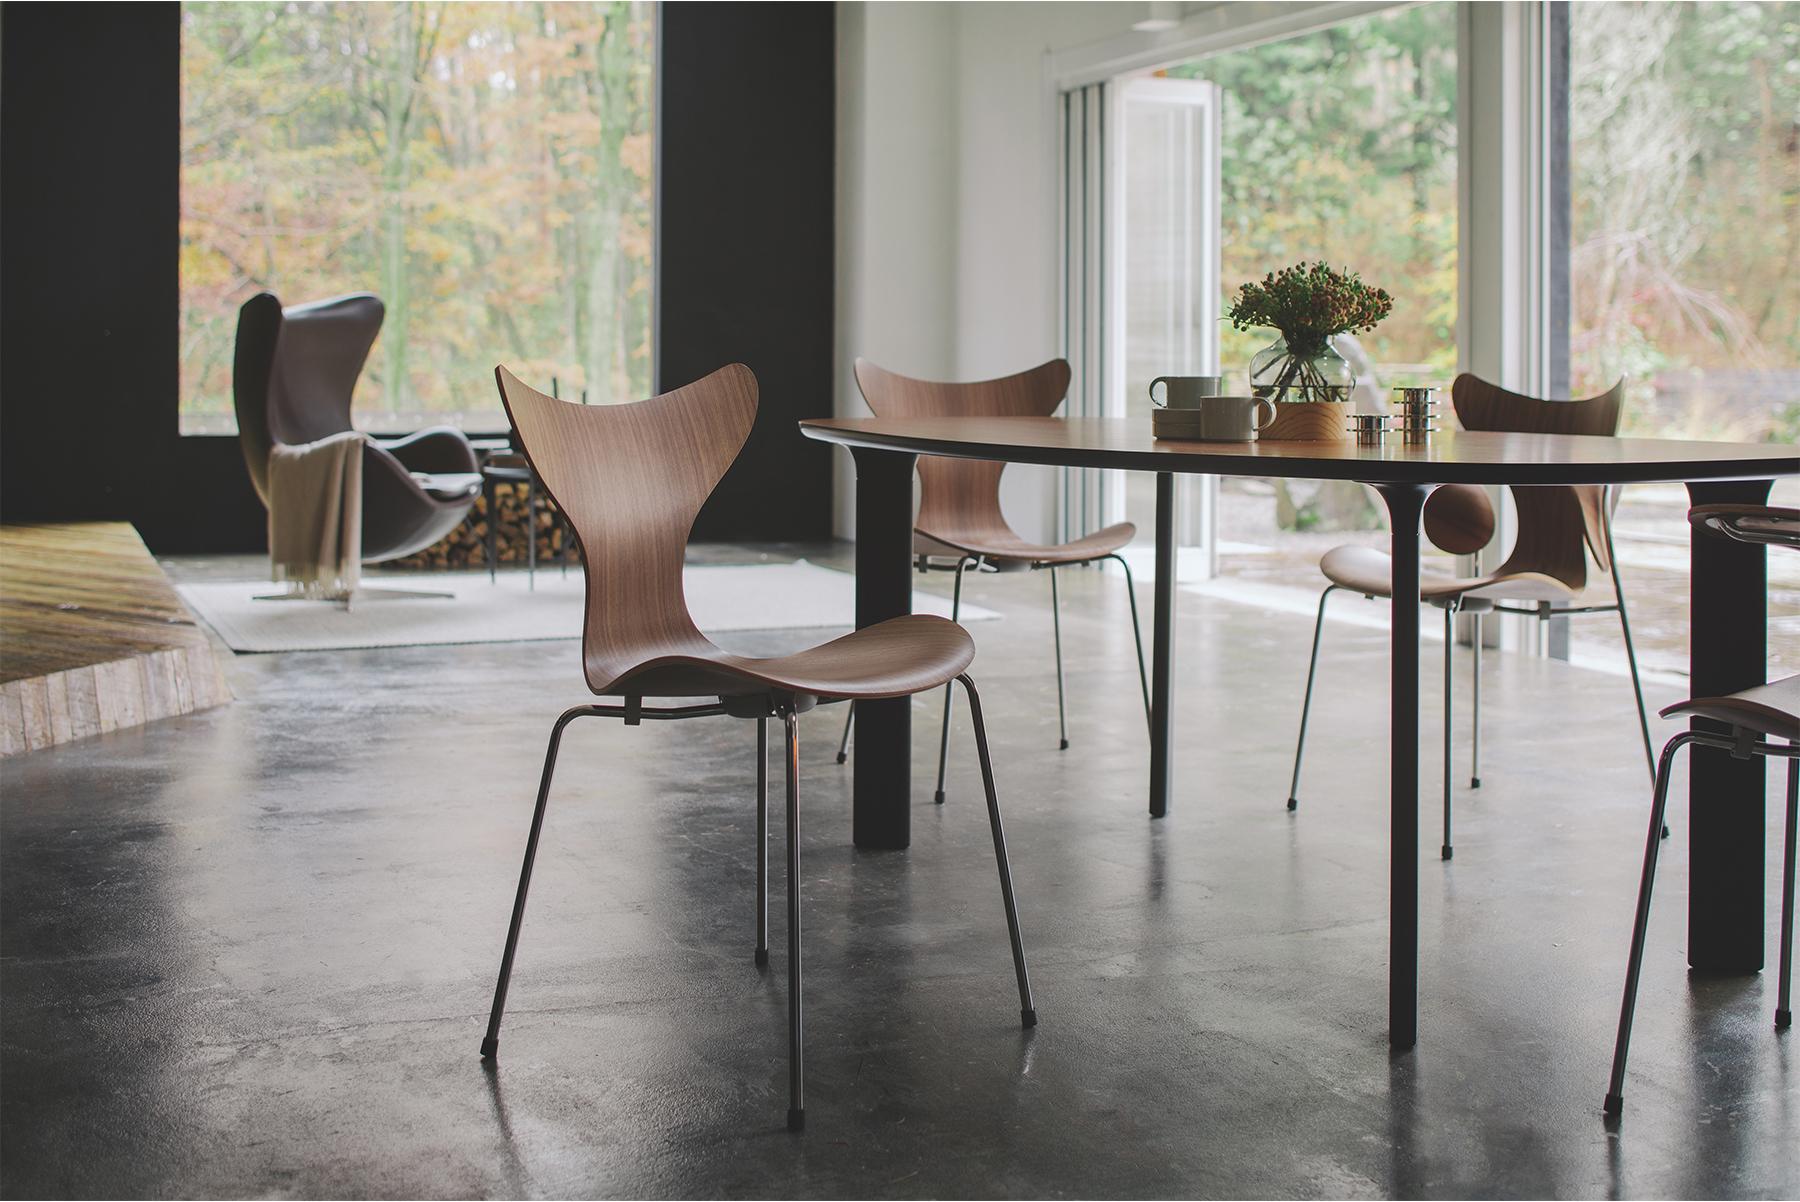 The Lily™ was originally designed for the Danish National Bank. The first model was 3108 from 1968, and the chair was introduced to the market with arms, model 3208, at the Danish Furniture Fair in 1970. The chair is made from laminated sliced